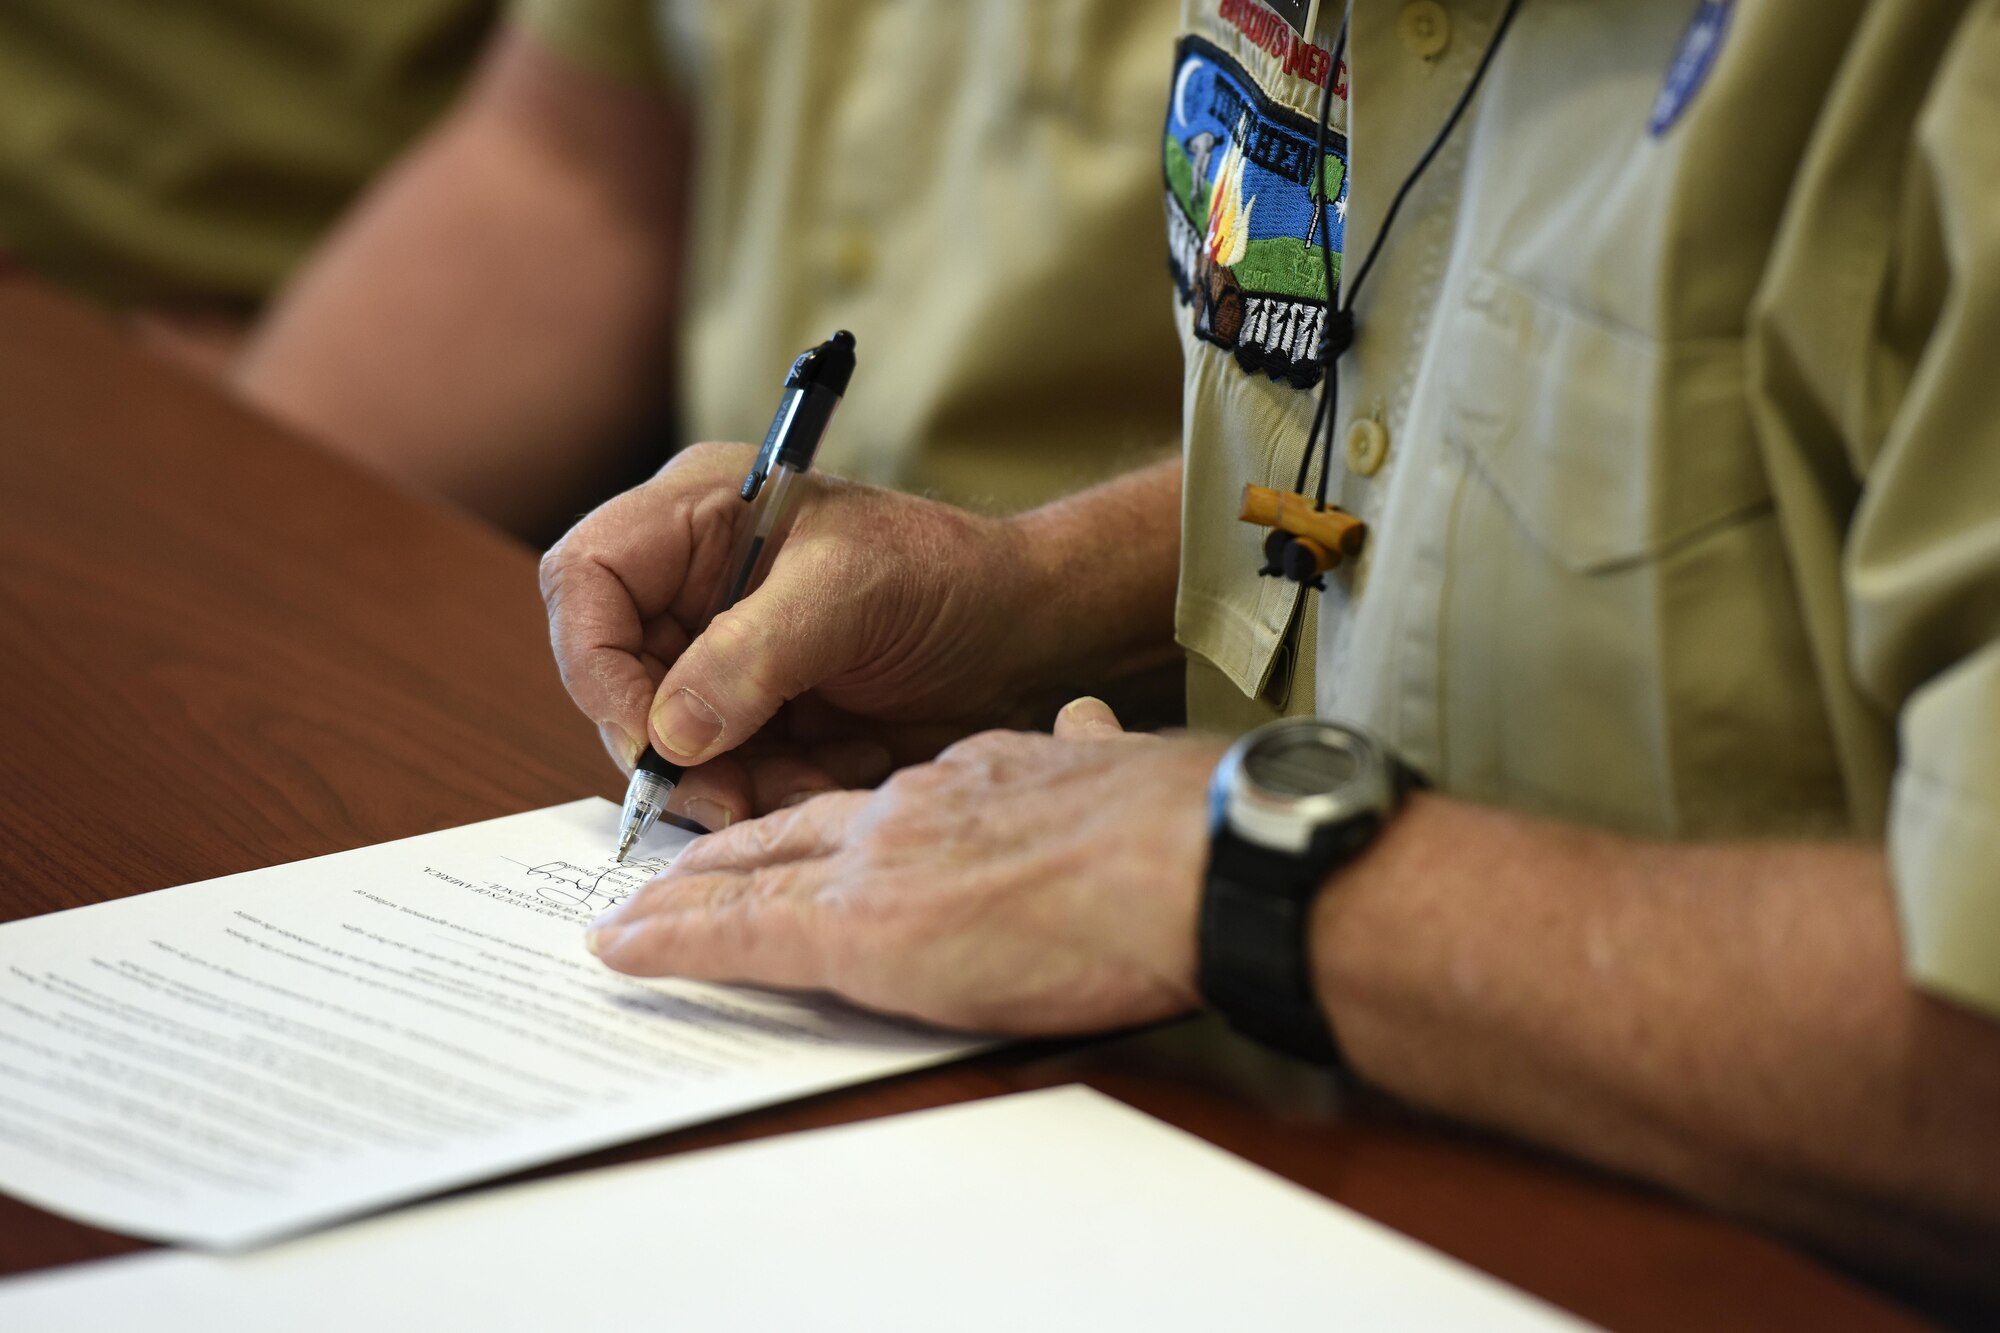 Ed Frey, president of the Eirie Shores Council, signs a Memorandum of Understanding between the 180th Fighter Wing and the Boy Scouts of America March 22, 2017 at the 180FW in Swanton, Ohio. The MOU provides a diverse leadership model to local Boy Scouts through exposure to 180FW Airmen and leaders, fostering a spirit of citizenship and civic responsibility while increasing event support, enhancing training opportunities and building stronger community relationships. (U.S. Air National Guard photo by Staff Sgt. Shane Hughes)